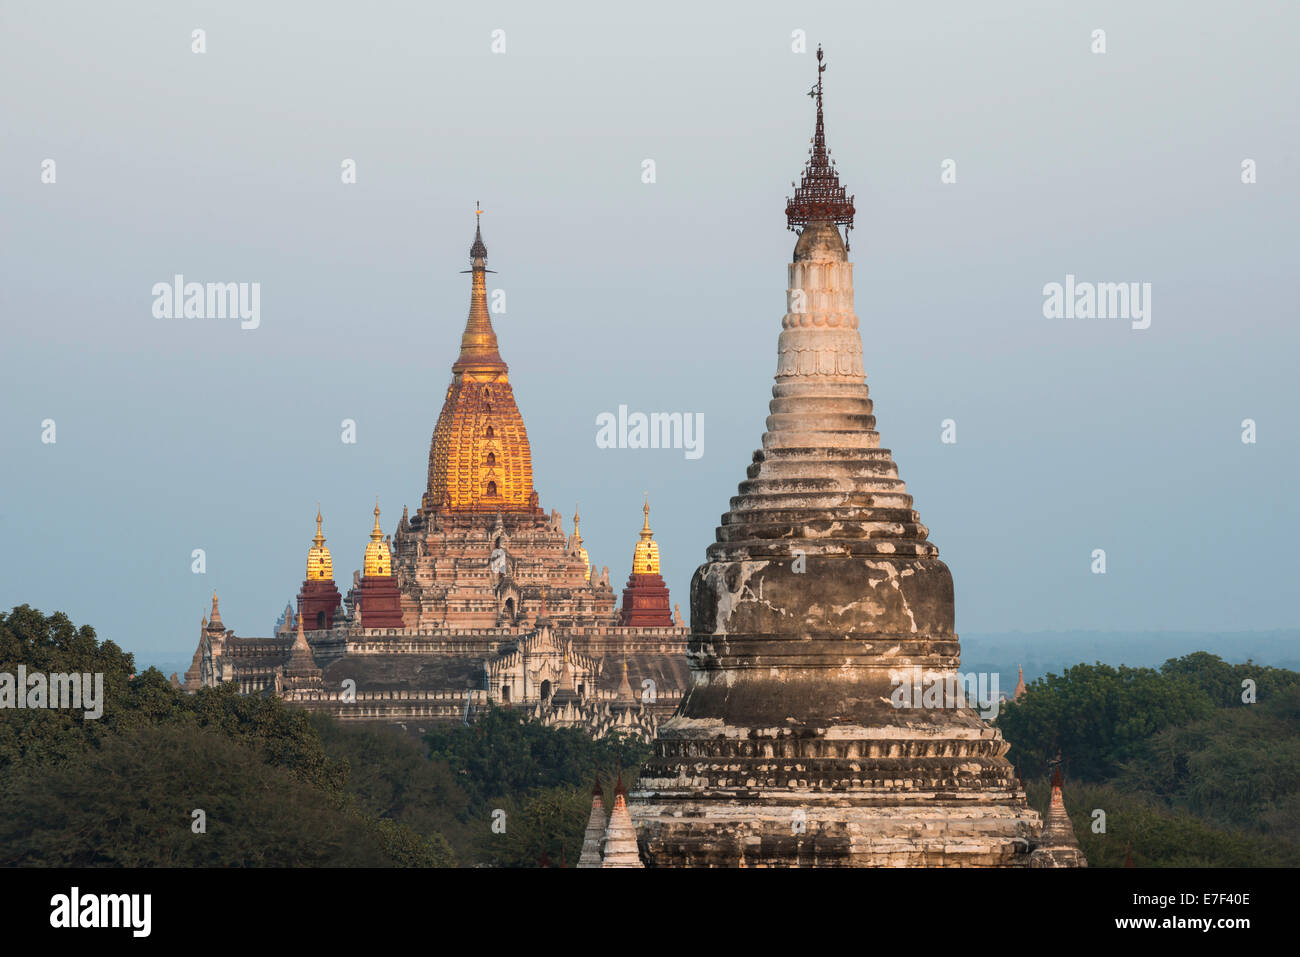 Ananda Temple, gilded tower structure or Shikhara, stupas, pagodas, temple complex, Plateau of Bagan, Mandalay Division Stock Photo